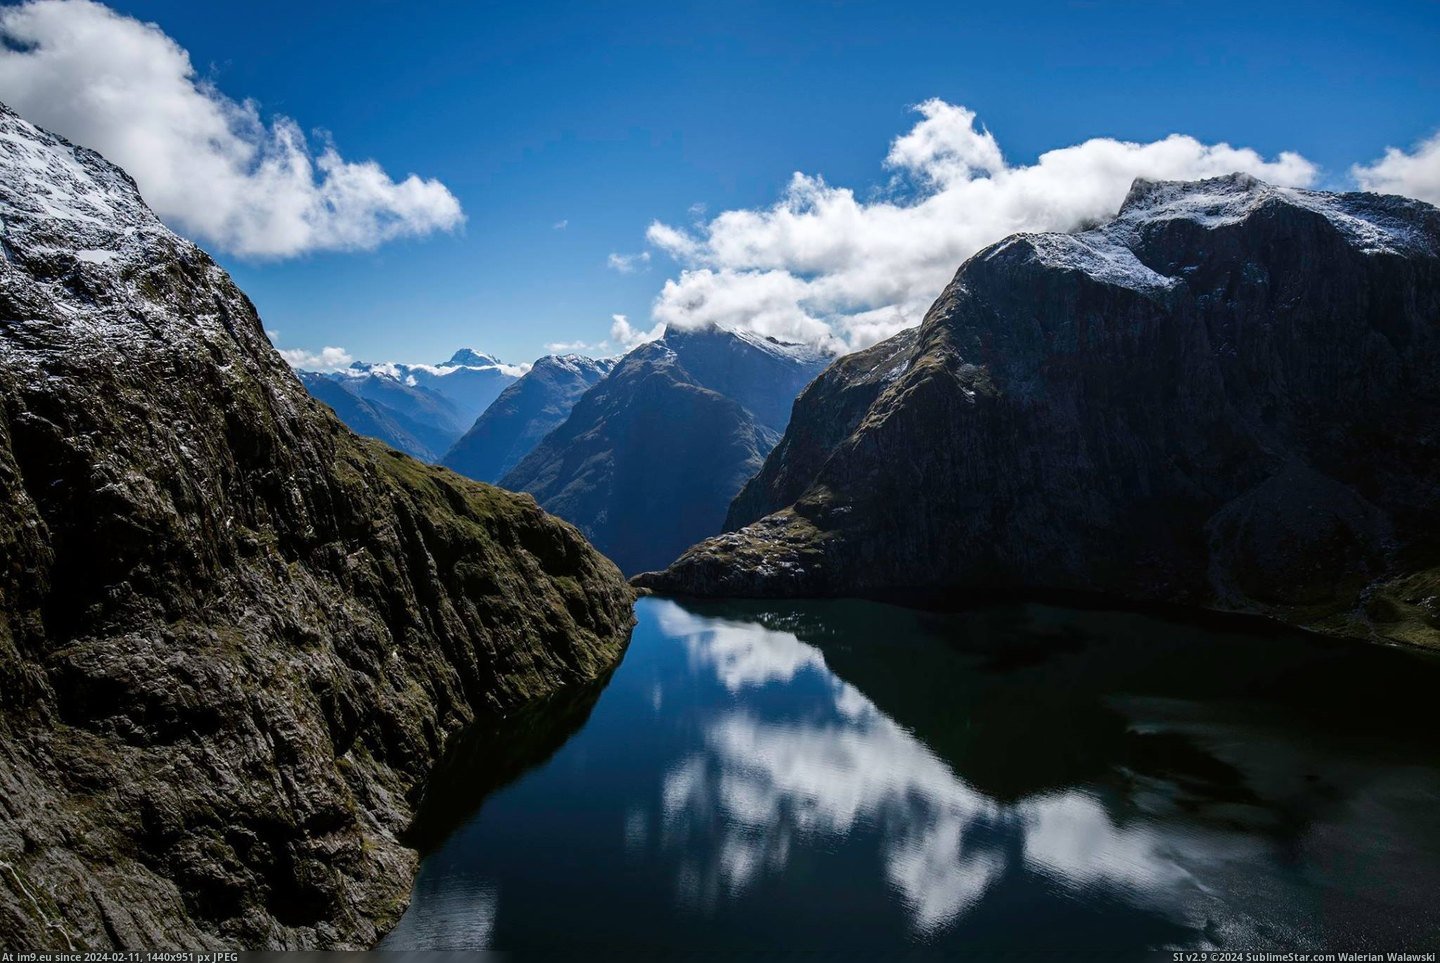 #High #Park #National #2048x1365 #Fiordland #Lake #Mountains #Zealand [Earthporn] Lake Quill, high up in the mountains of Fiordland National Park, New Zealand [2048x1365] Pic. (Изображение из альбом My r/EARTHPORN favs))